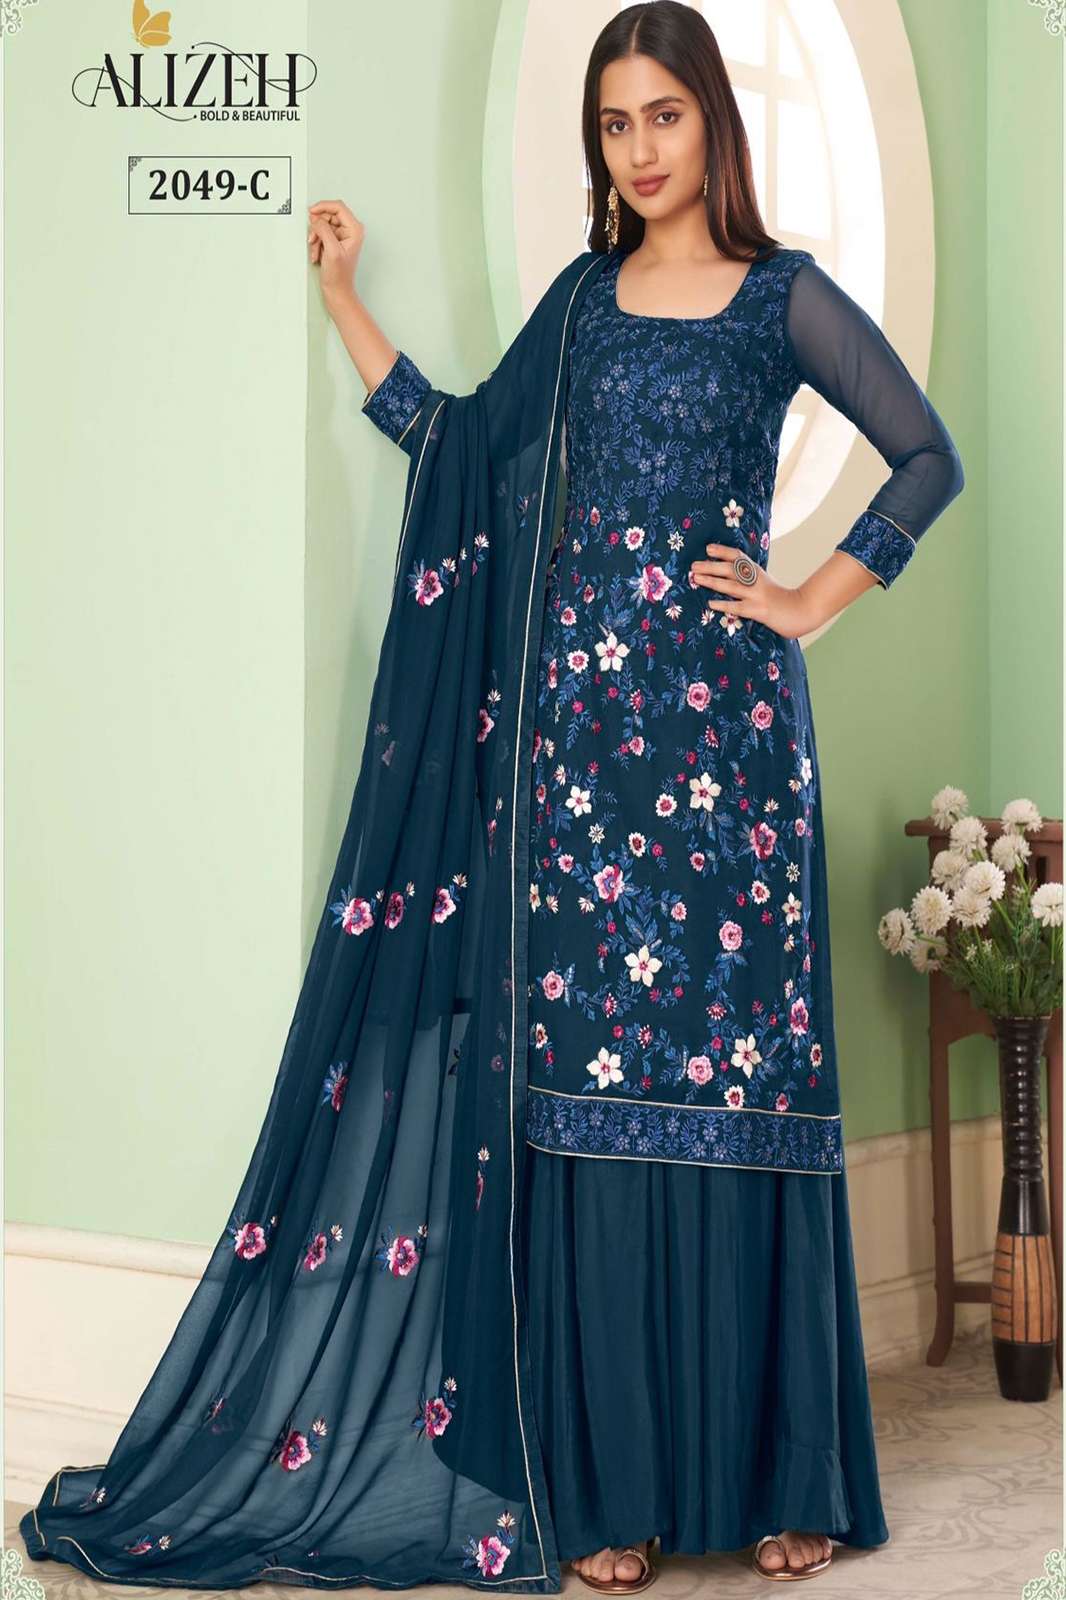 ALIZEH santoon multi colors thread with sequin embroidery suit.